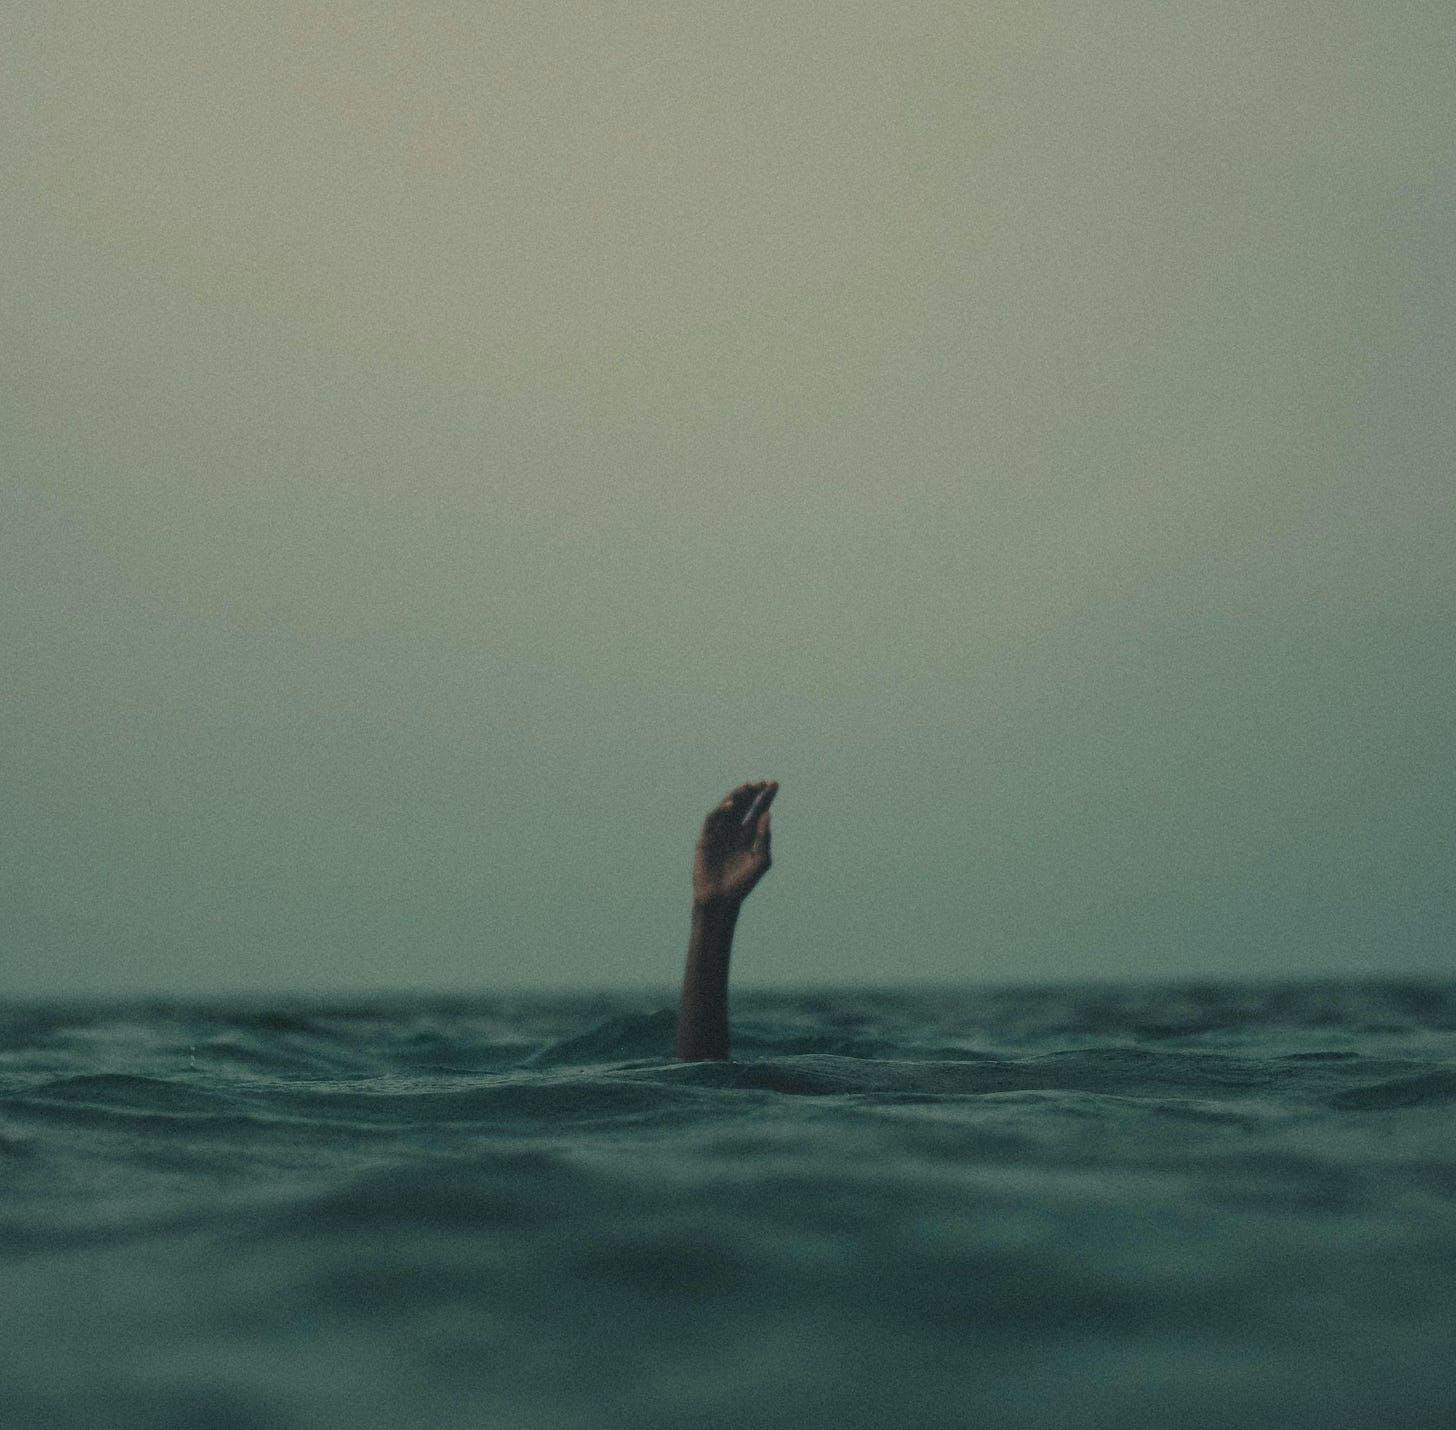 A hand reaches out of the ocean against a pale blue sky